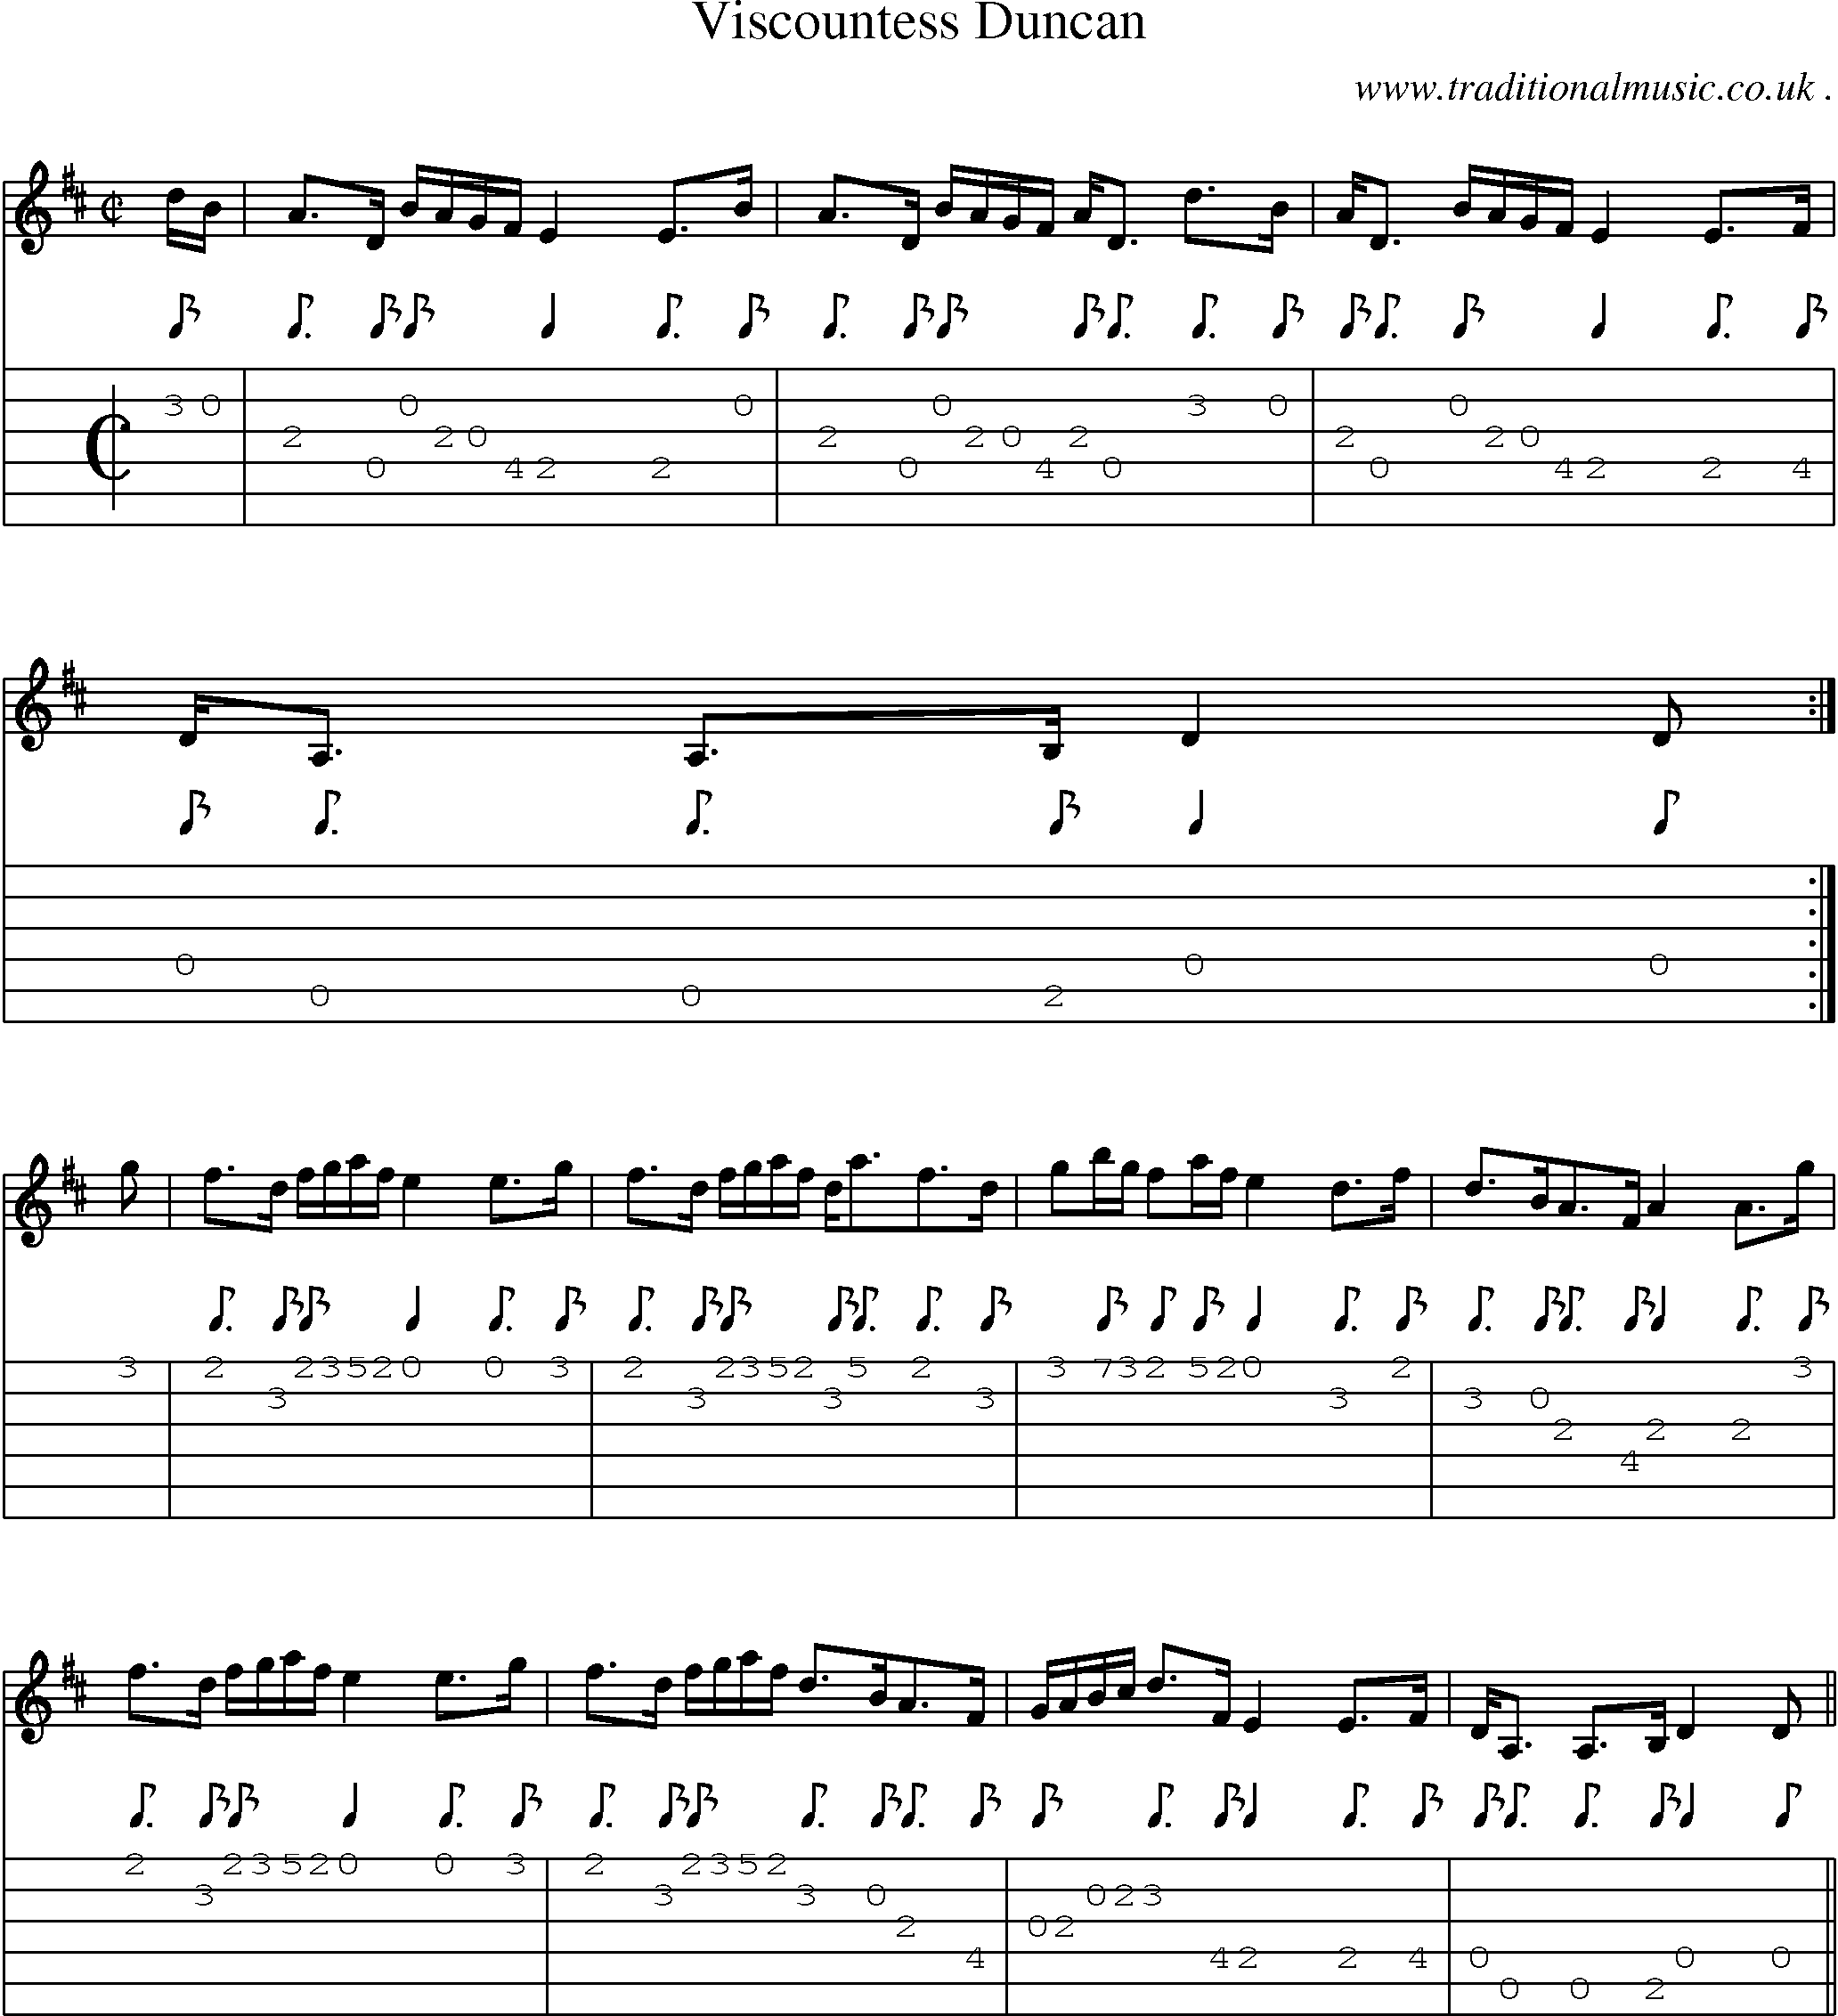 Sheet-music  score, Chords and Guitar Tabs for Viscountess Duncan